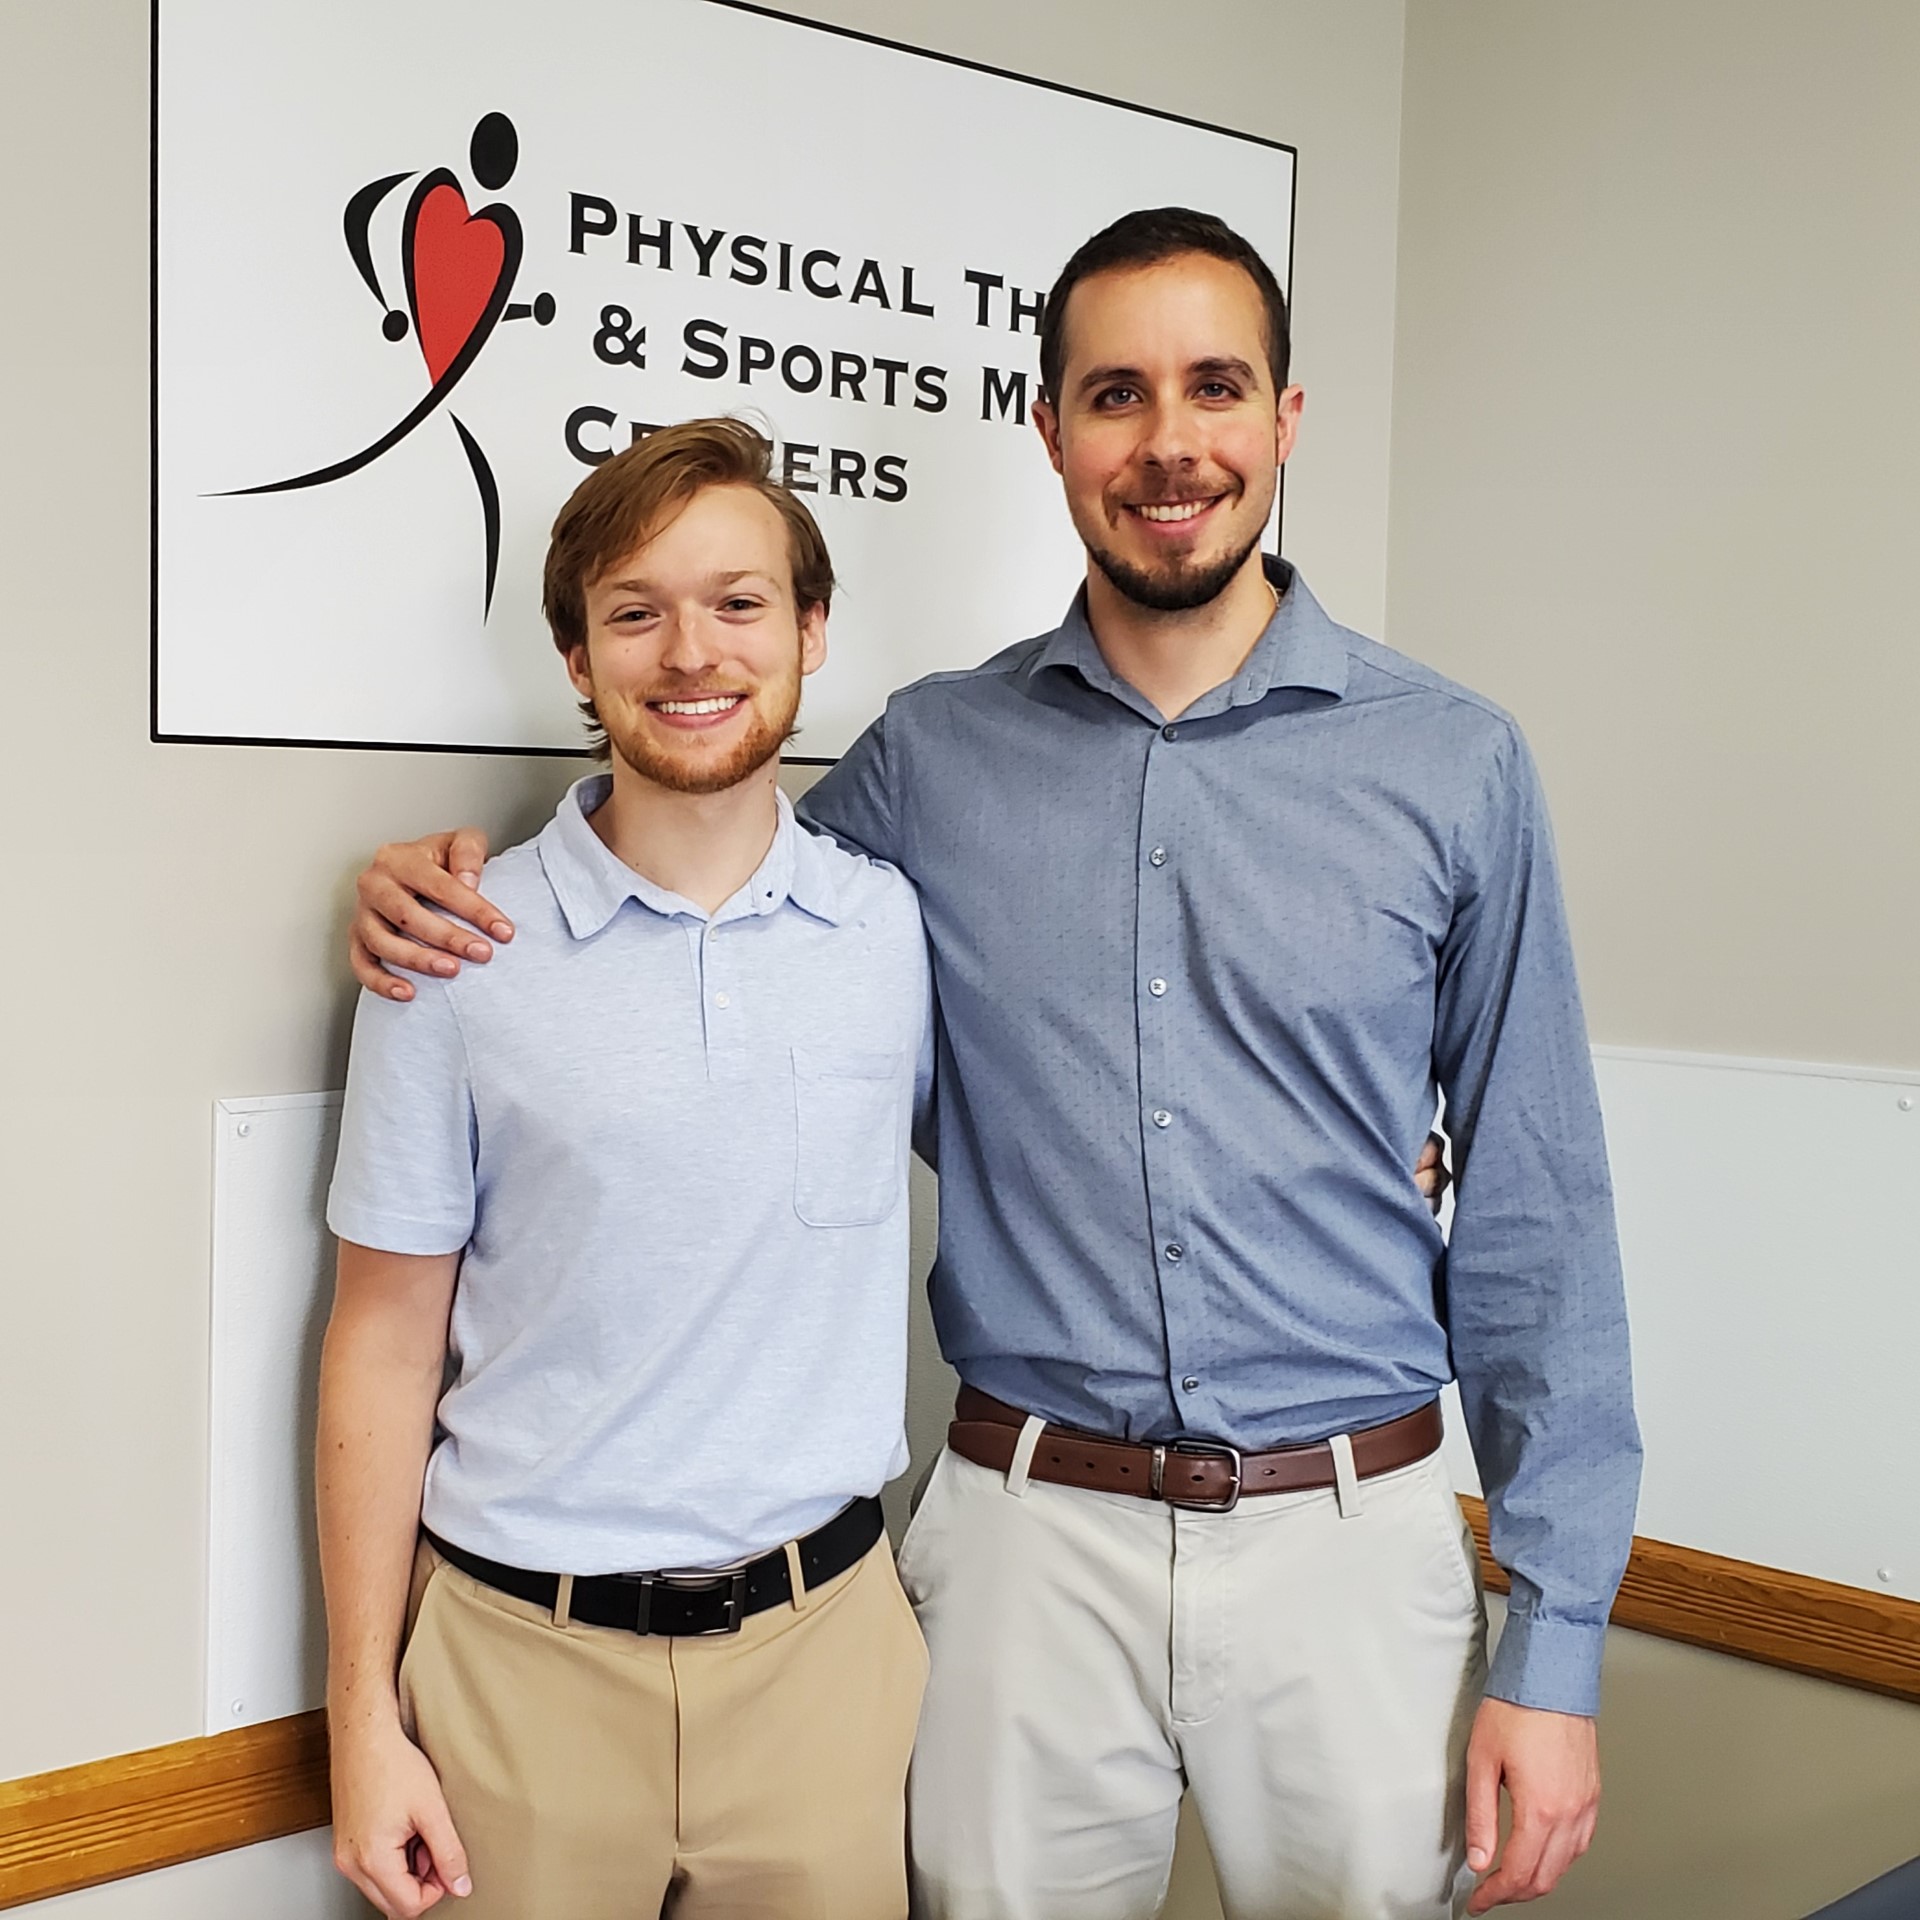 Physical Therapy & sports Medicine Centers in New Haven student program